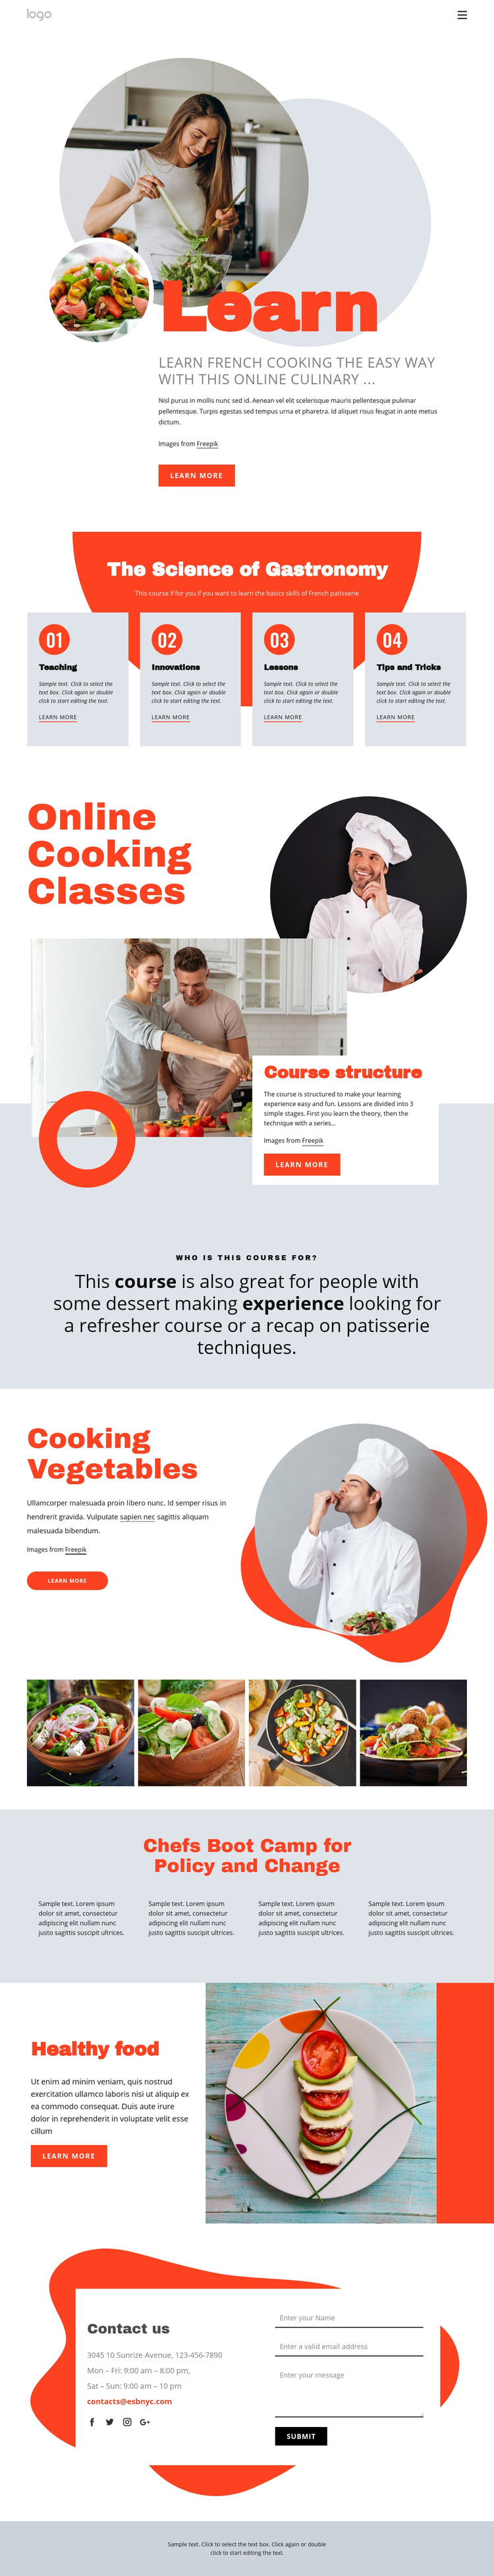 Learn cooking the easy way Homepage Design